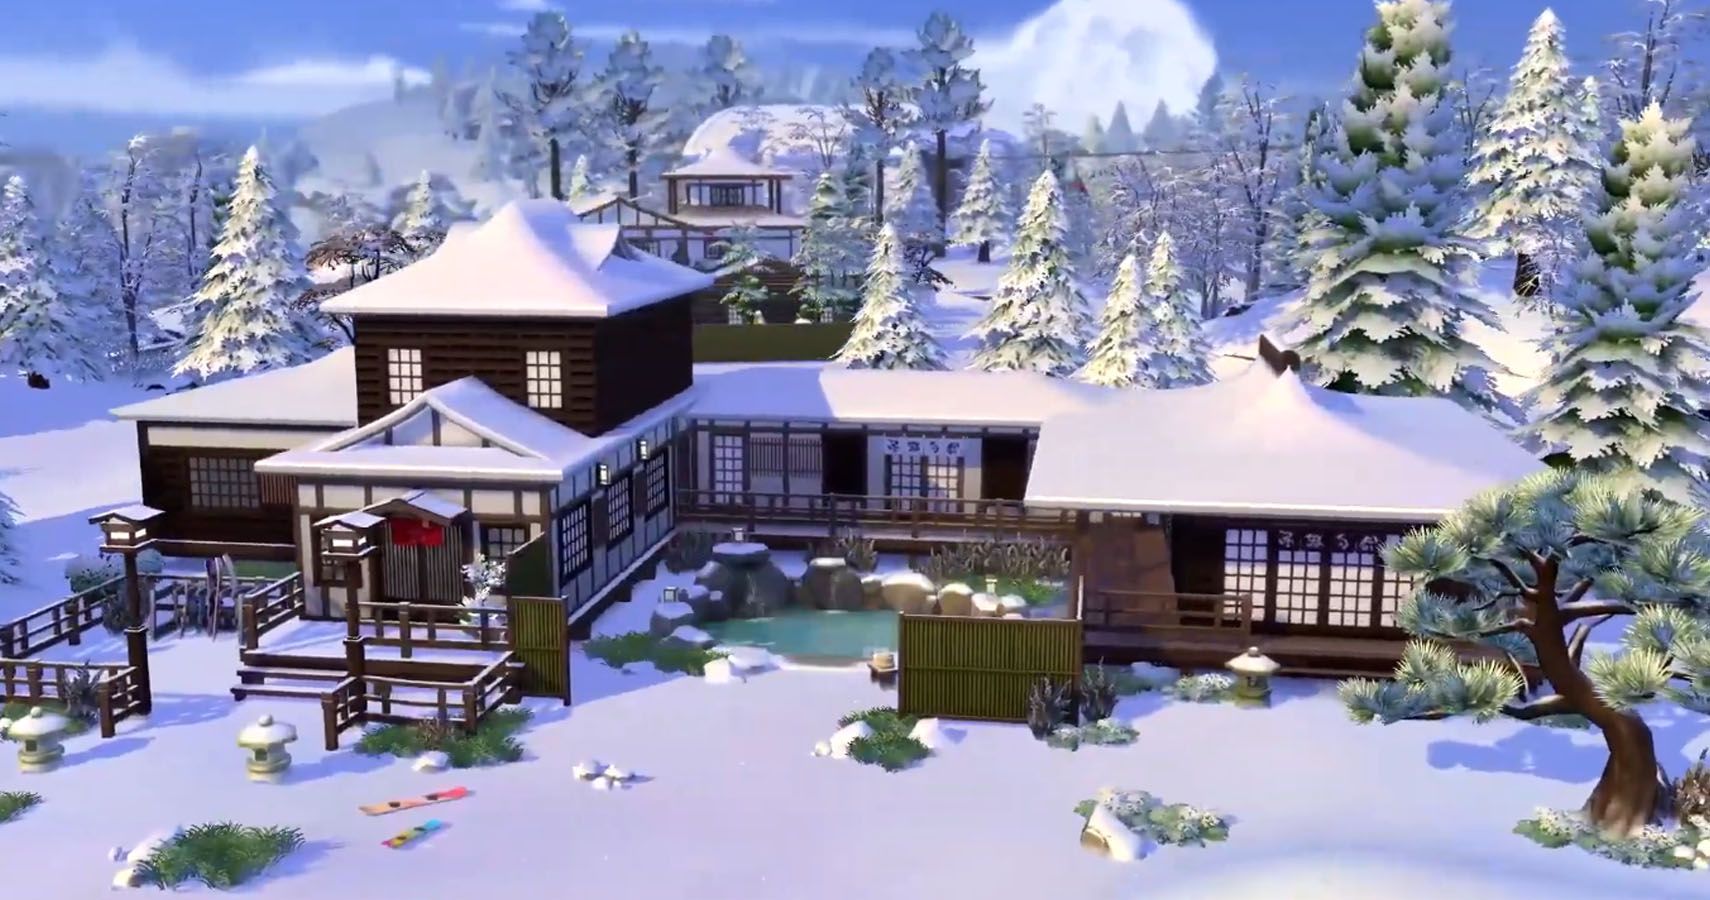 A snowy Japanese home form the Snowy escape TS4 trailer